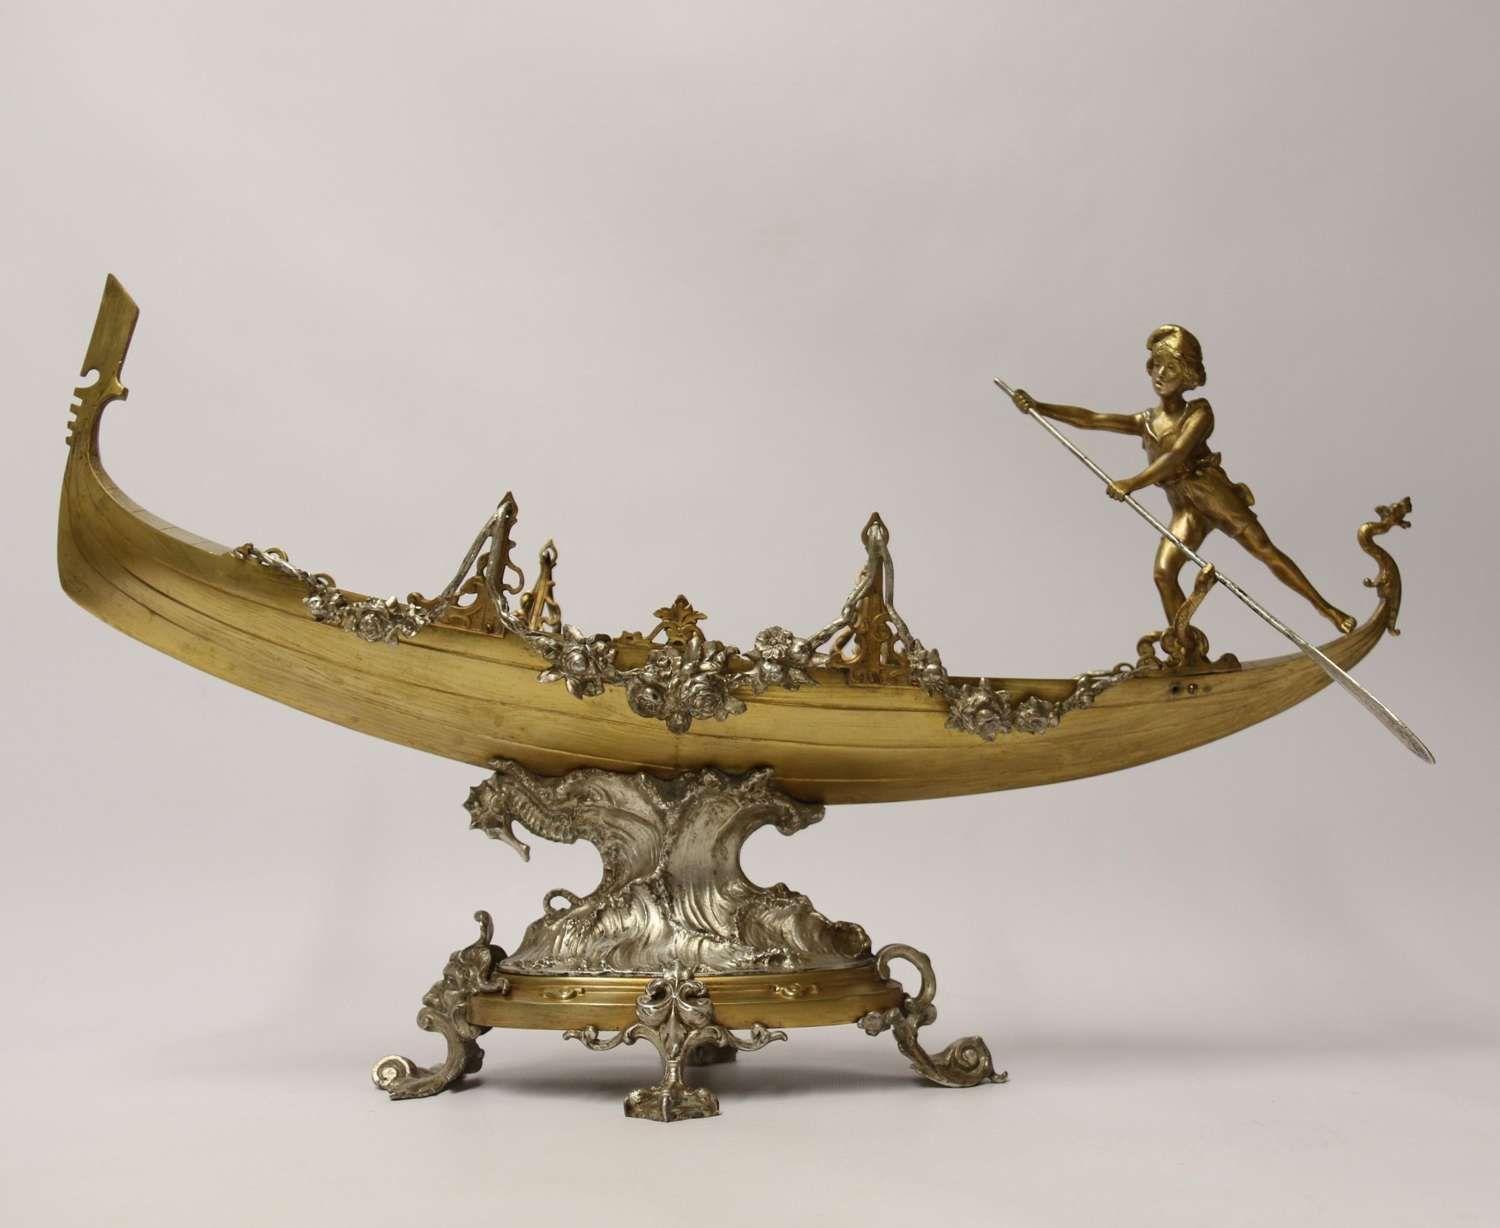 A Fine Silver And Gilt Bronze Table Centre Piece In The Form Of A Gondola